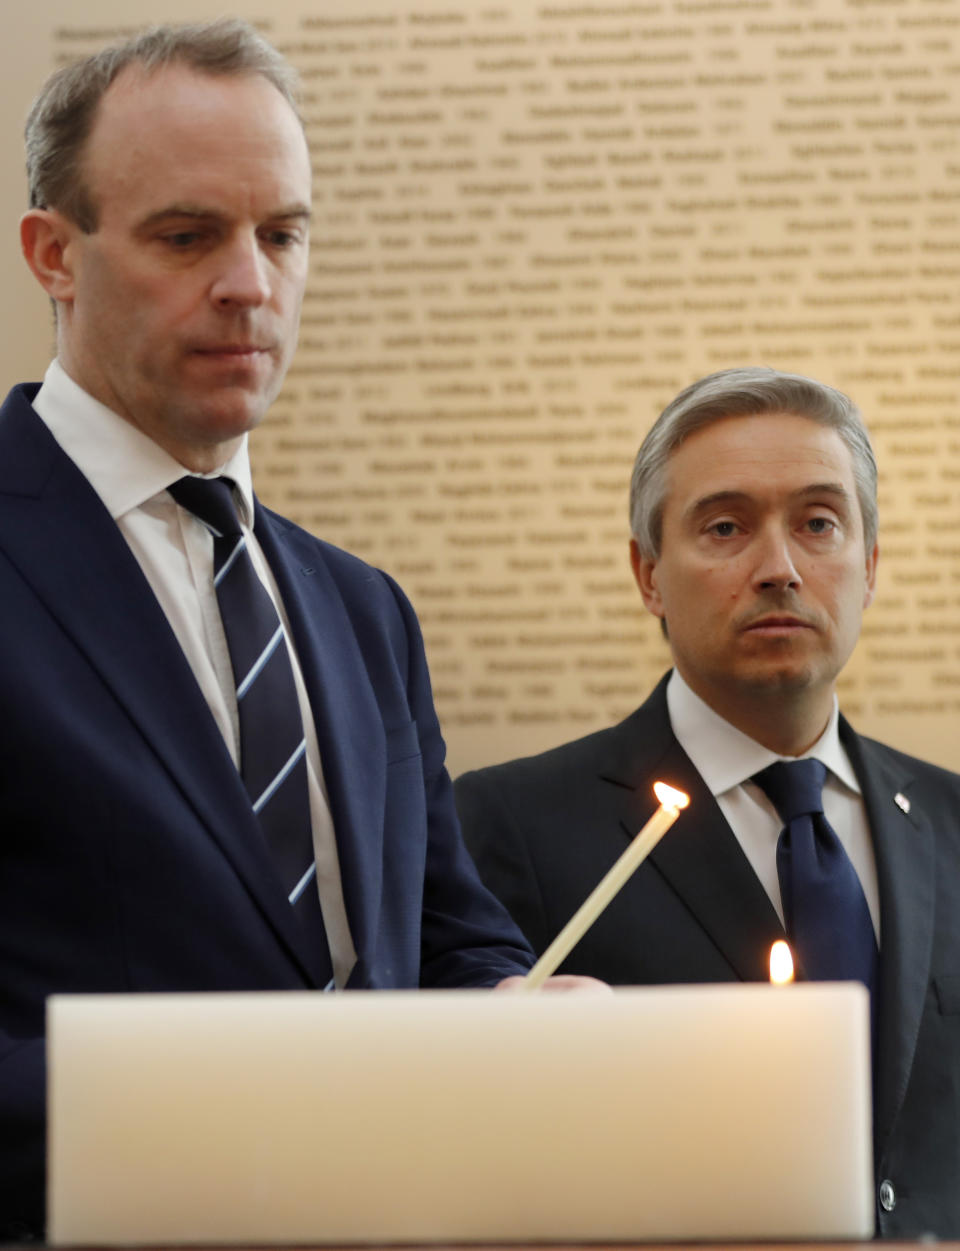 François-Philippe Champagne, Canada Minister of Foreign Affairs, right, UK's Secretary of ~State for Foreign Affair Dominic Raab light a candle in front of a plaque with the names of the victims of flight PS752, at the High Commission of Canada in London, Thursday, Jan. 16, 2020. The Foreign ministers gather in a meeting of the International Coordination and Response Group for the families of the victims of PS752 flight crashed shortly after taking off from the Iranian capital Tehran on Jan. 8, killing all 176 passengers and crew on board.(AP Photo/Frank Augstein)